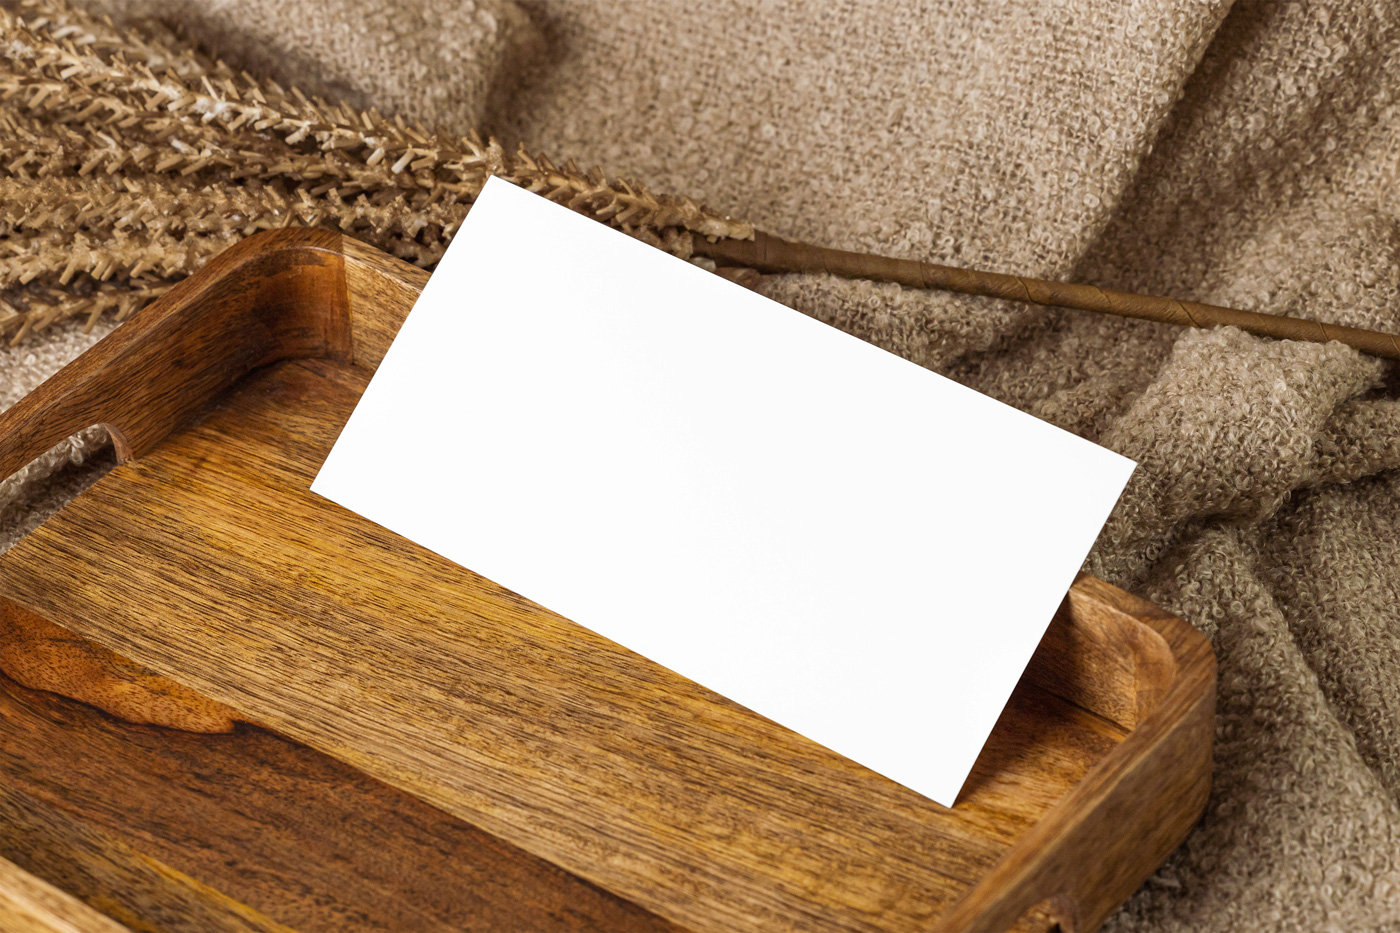 Artistic Oblong Card Mockup on Wooden Plate FREE PSD